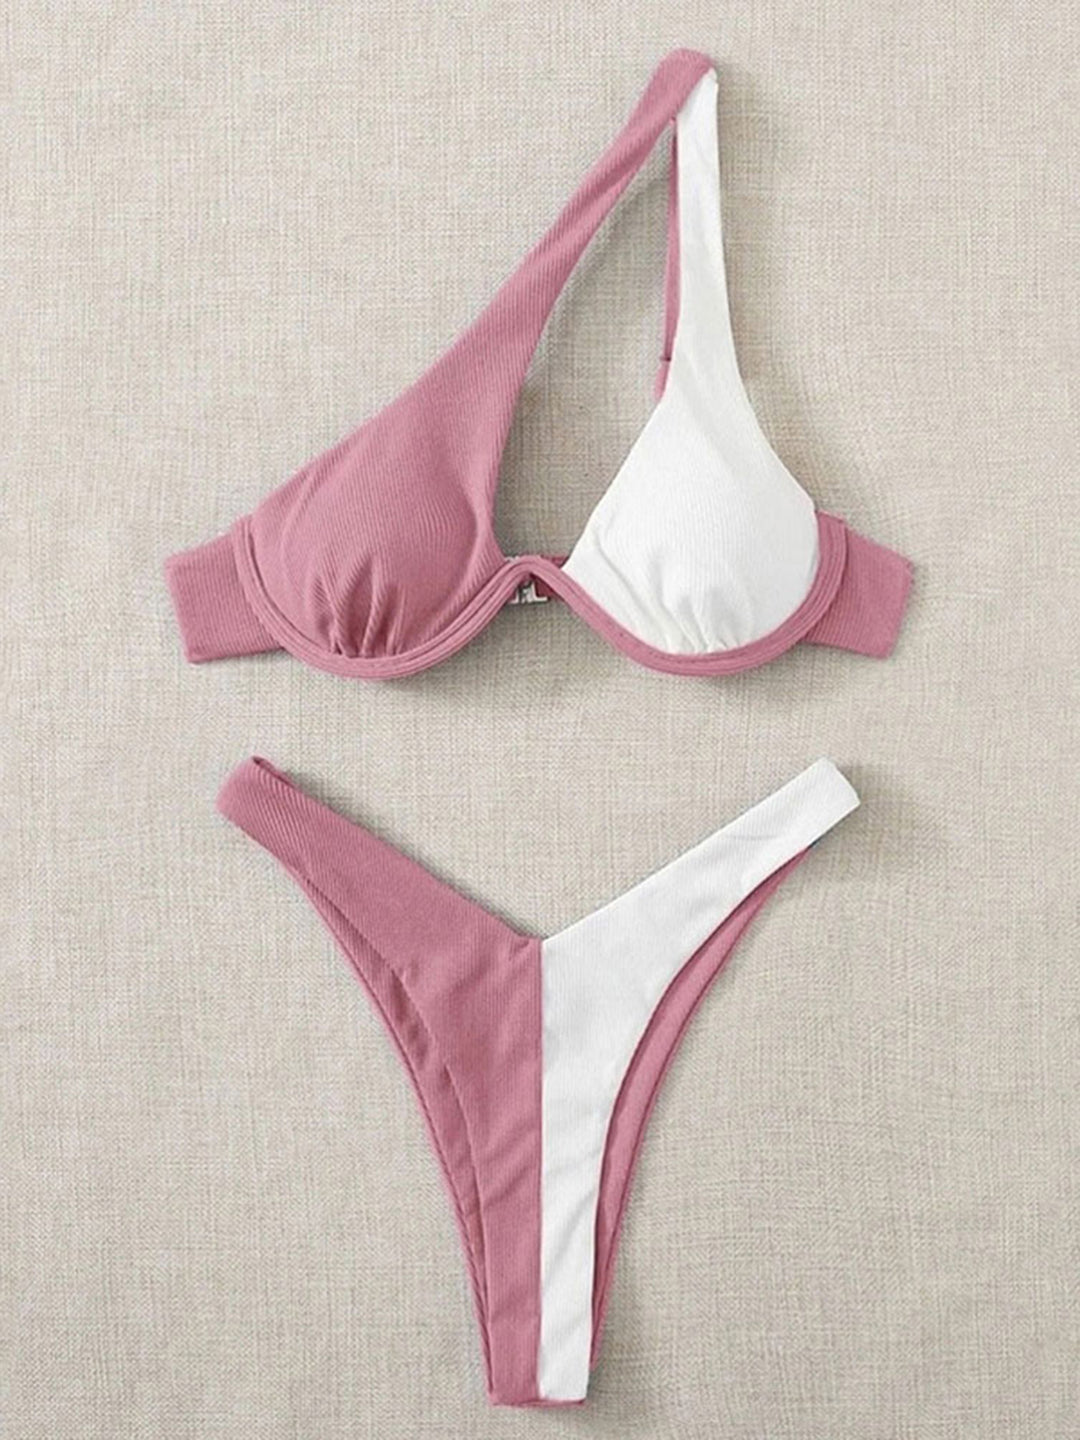 a pair of pink and white bikini bottoms